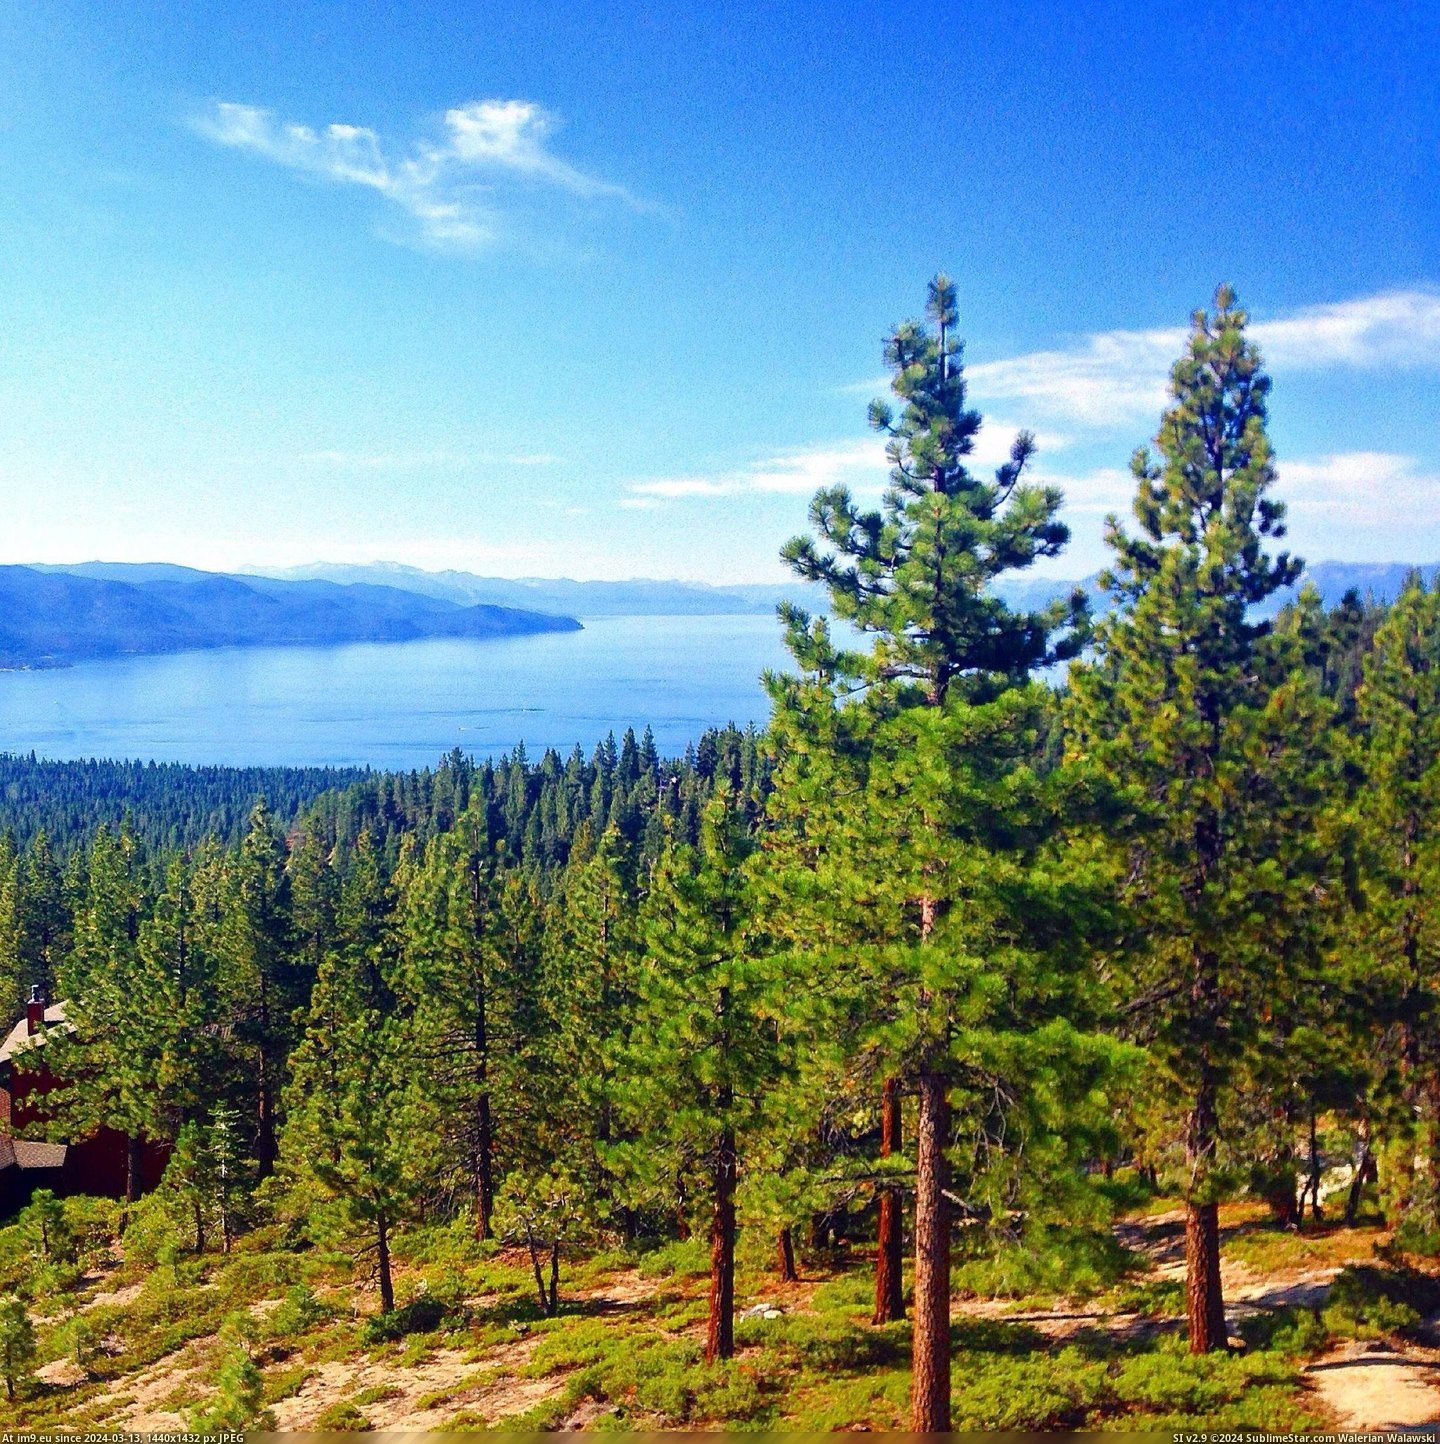 #Lake #Usa #Nevada #1936x1936 #Incline #Village #Tahoe [Earthporn] Incline Village, Lake Tahoe, Nevada, USA [1936x1936] Pic. (Image of album My r/EARTHPORN favs))